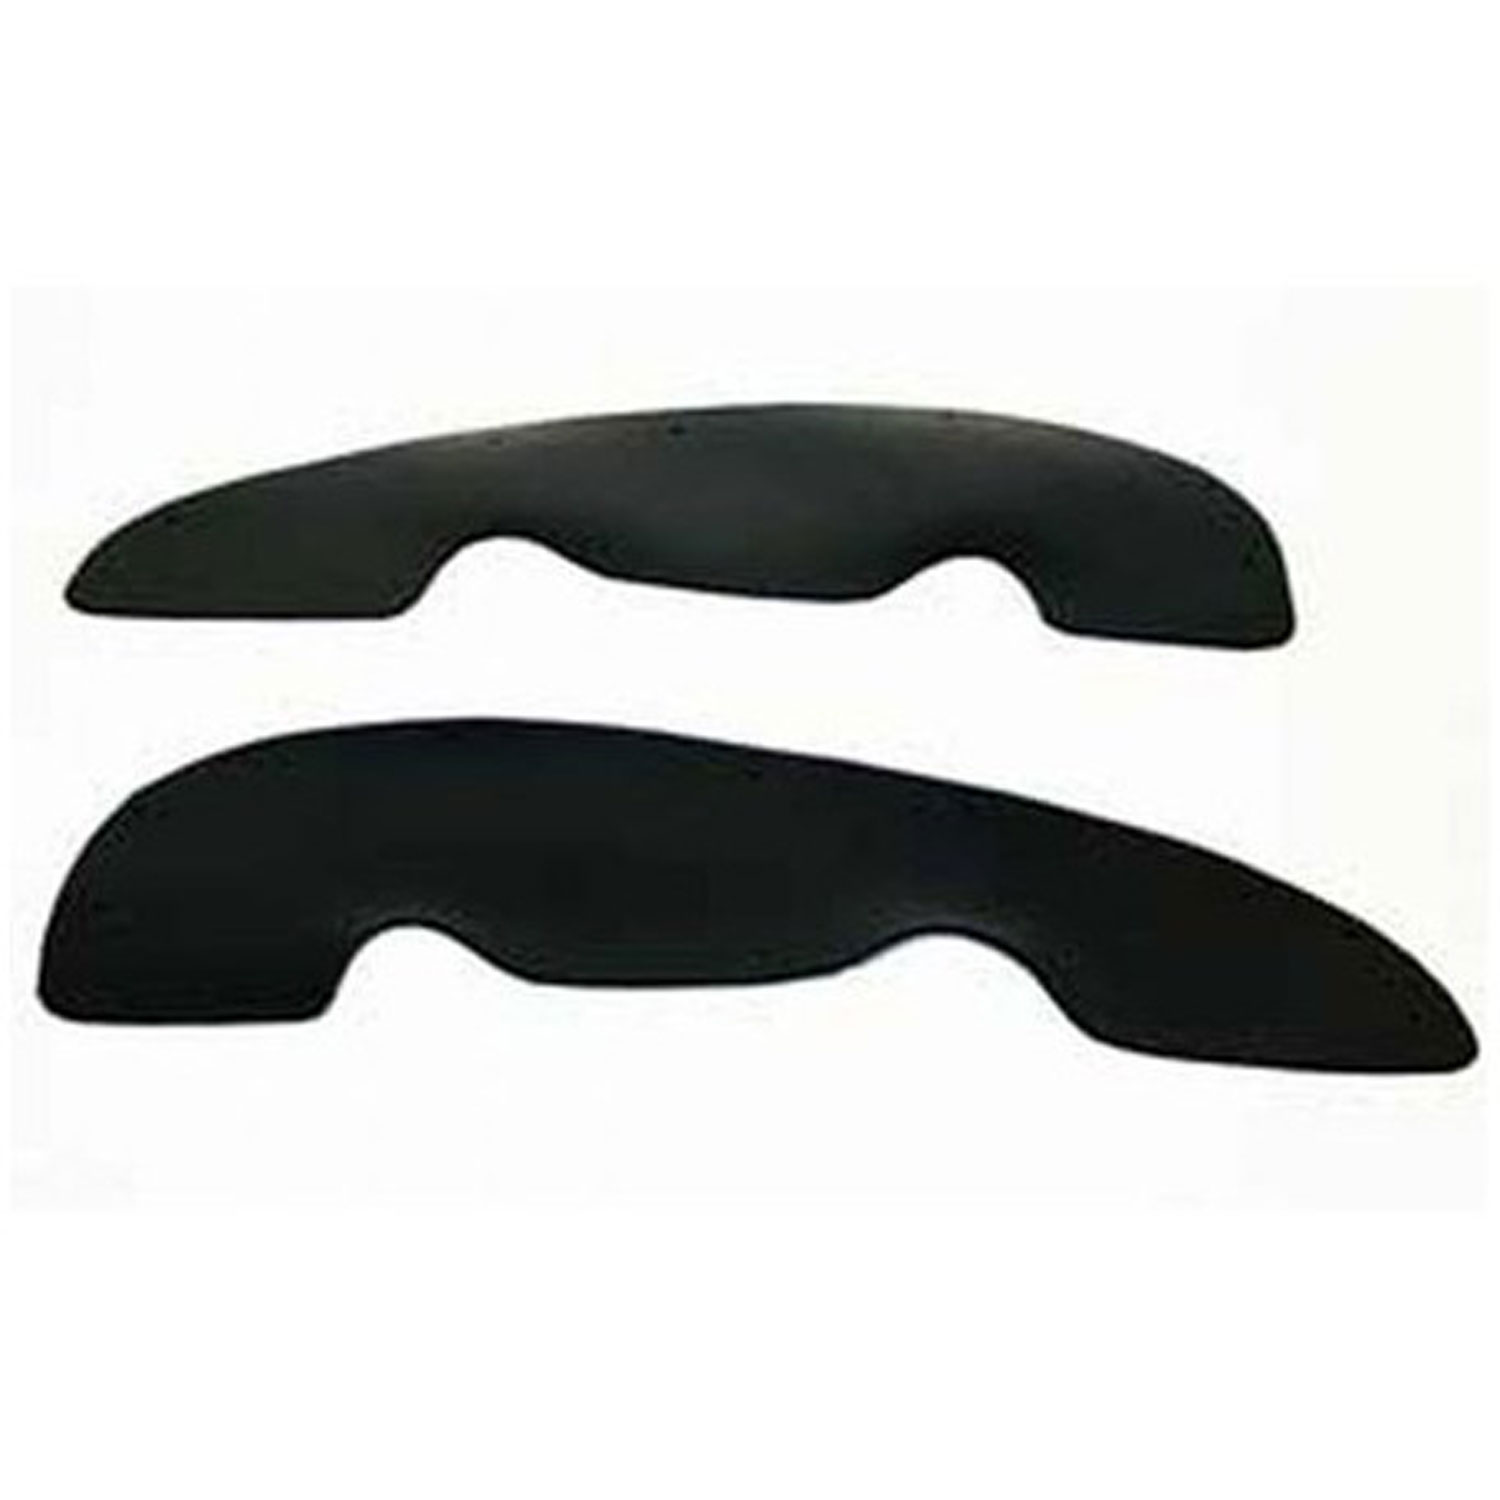 Wheel Well Gap Guard Kit for 2001-2002 Ford Explorer Sport Trac 4WD